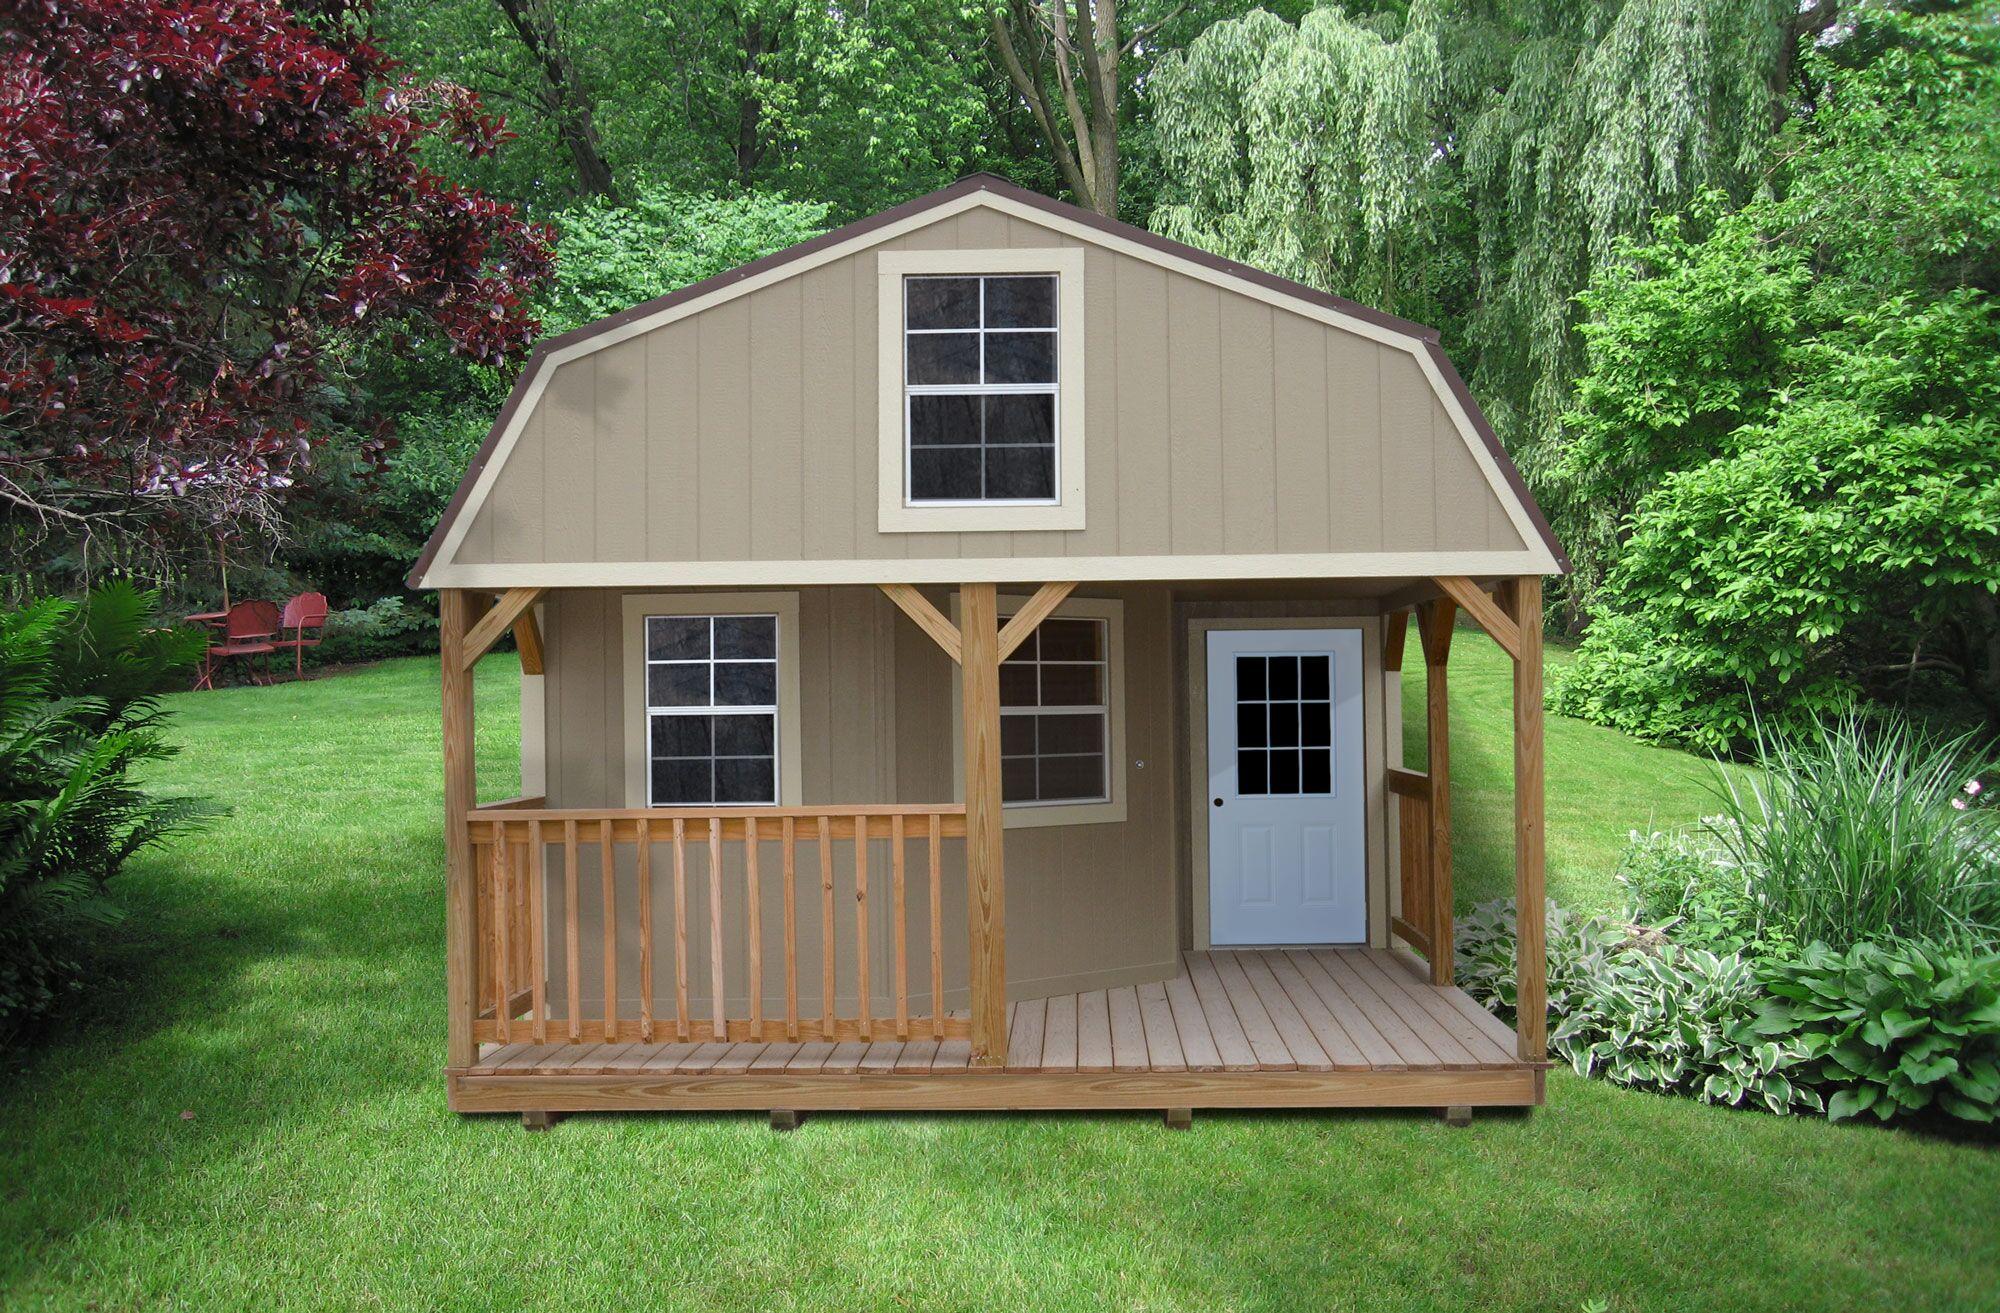 PAINTED DELUXE LOFTED BARN CABIN